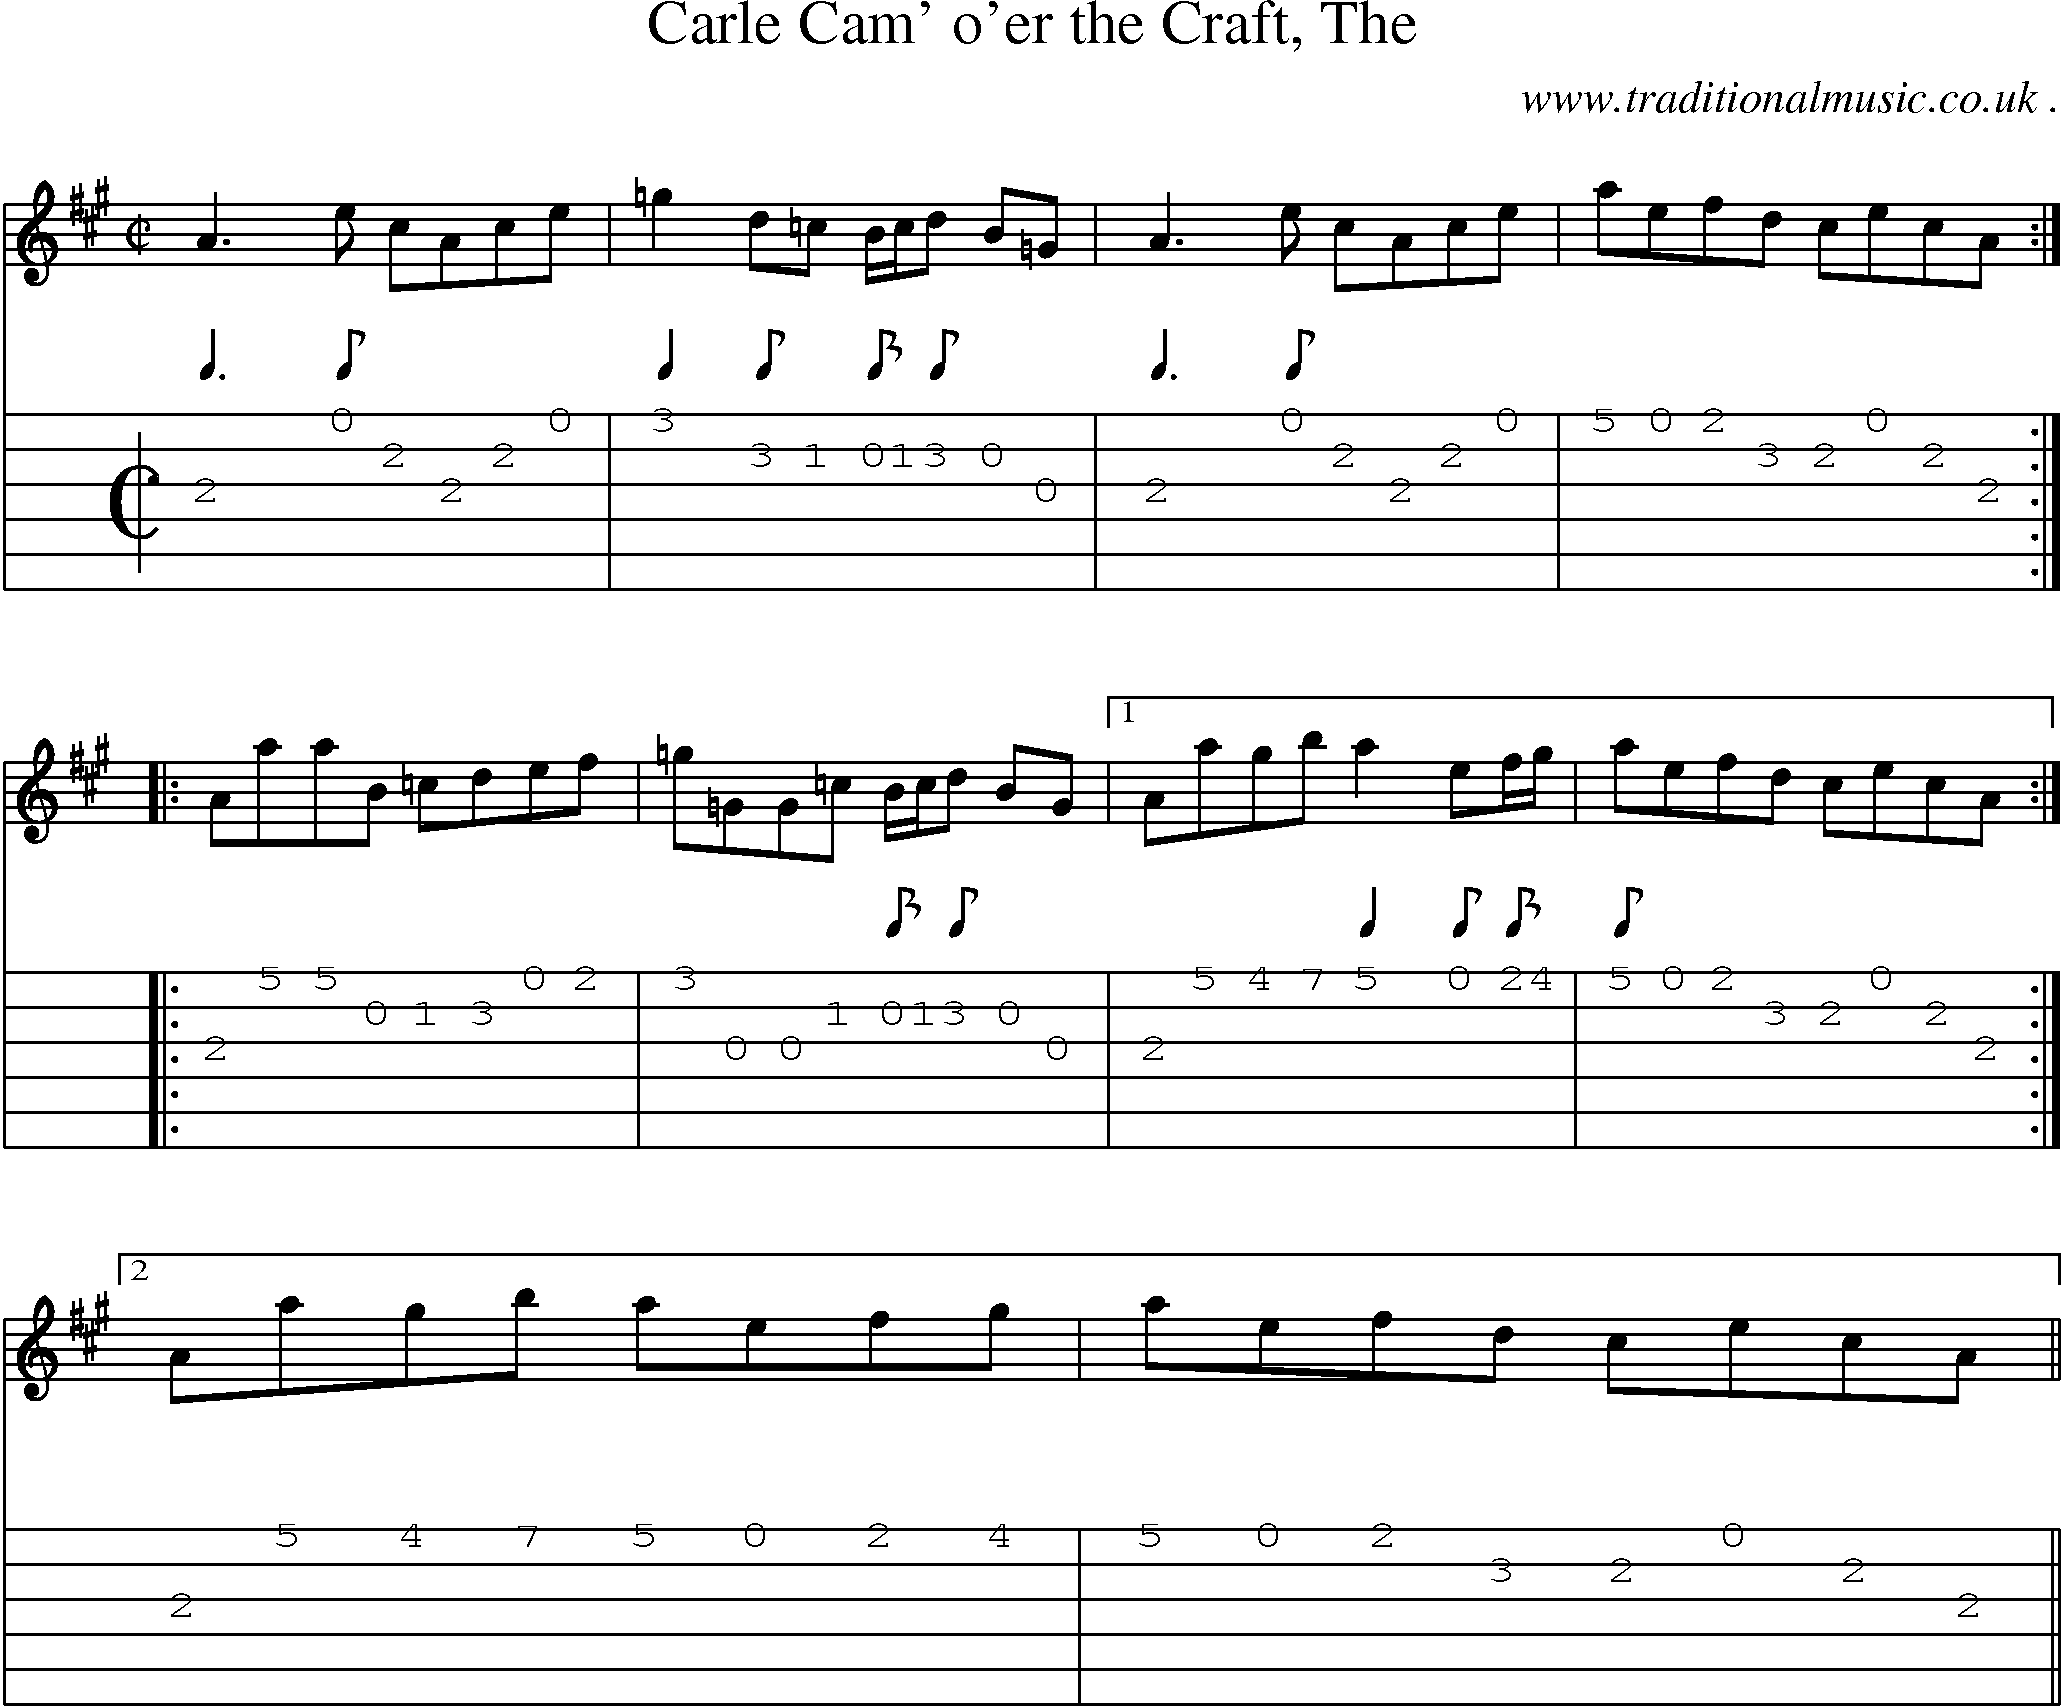 Sheet-music  score, Chords and Guitar Tabs for Carle Cam Oer The Craft The